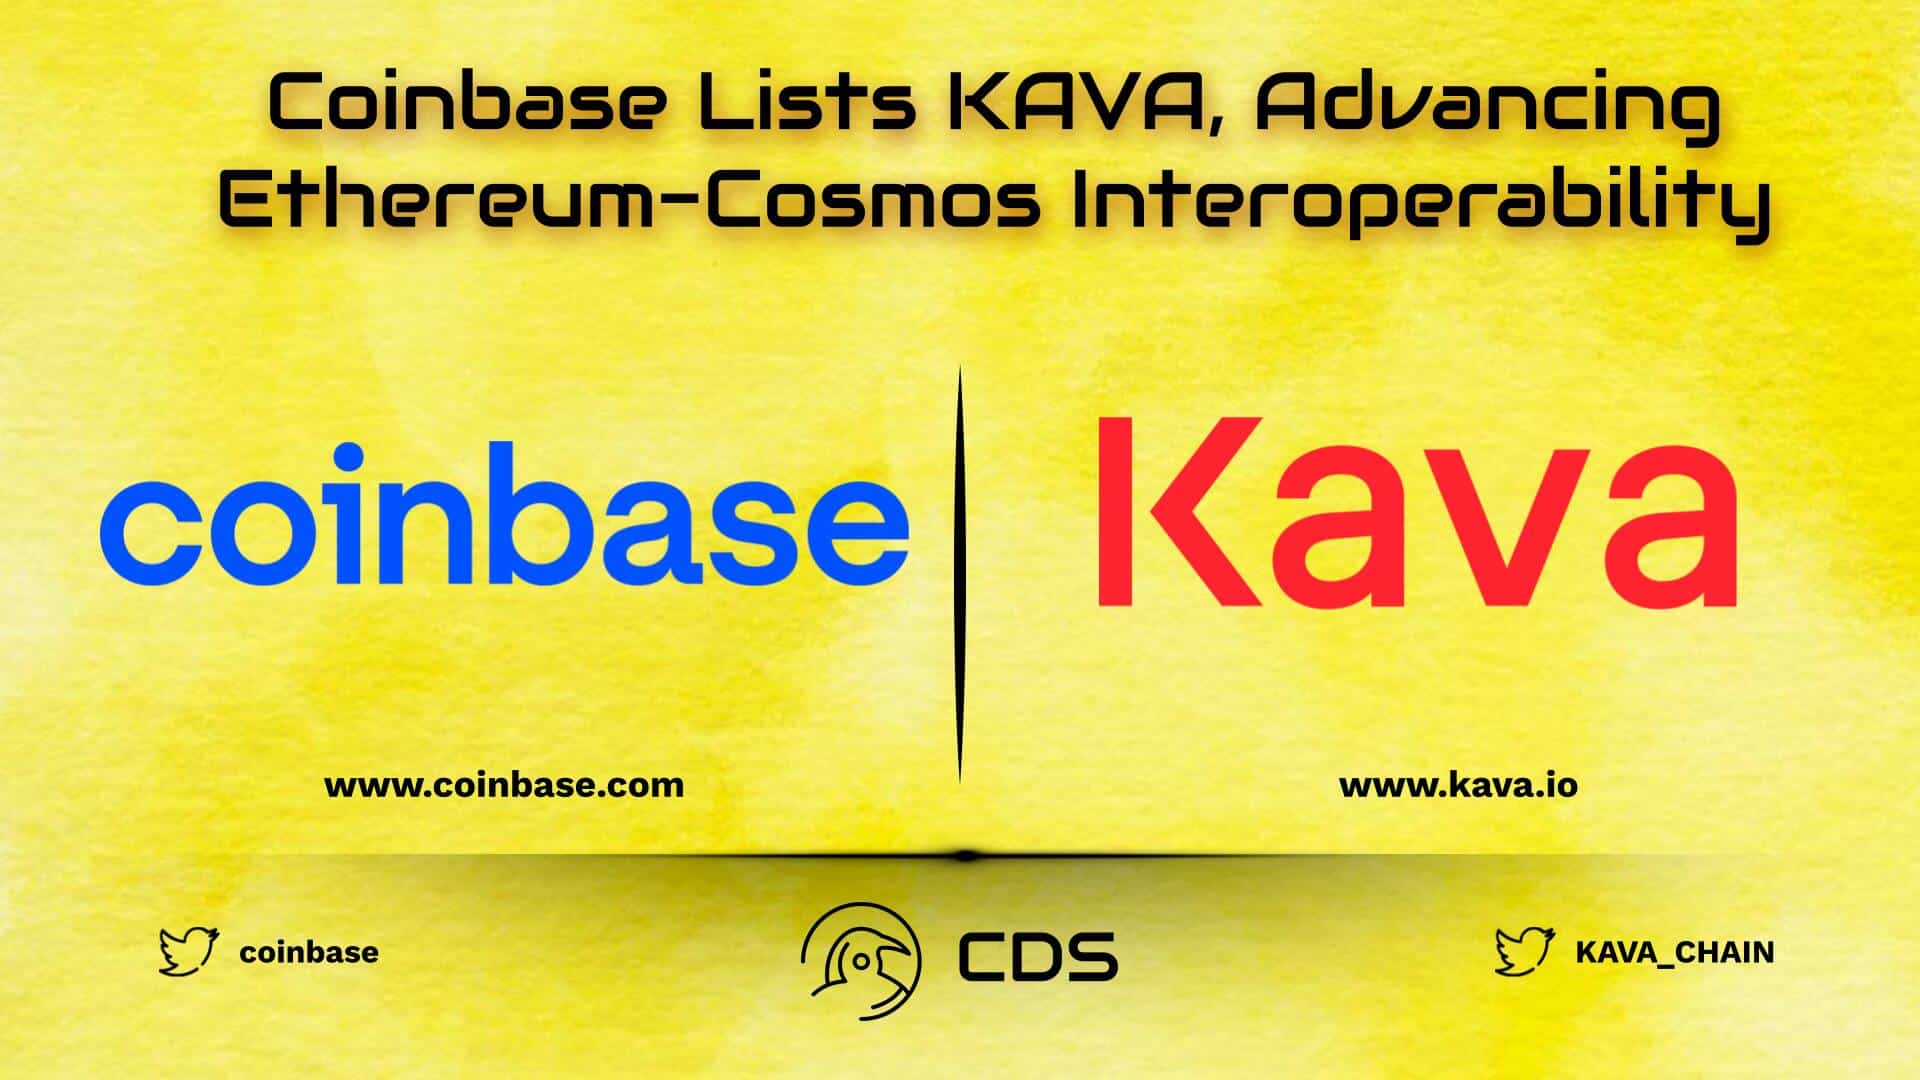 Coinbase Lists KAVA, Advancing Ethereum-Cosmos Interoperability